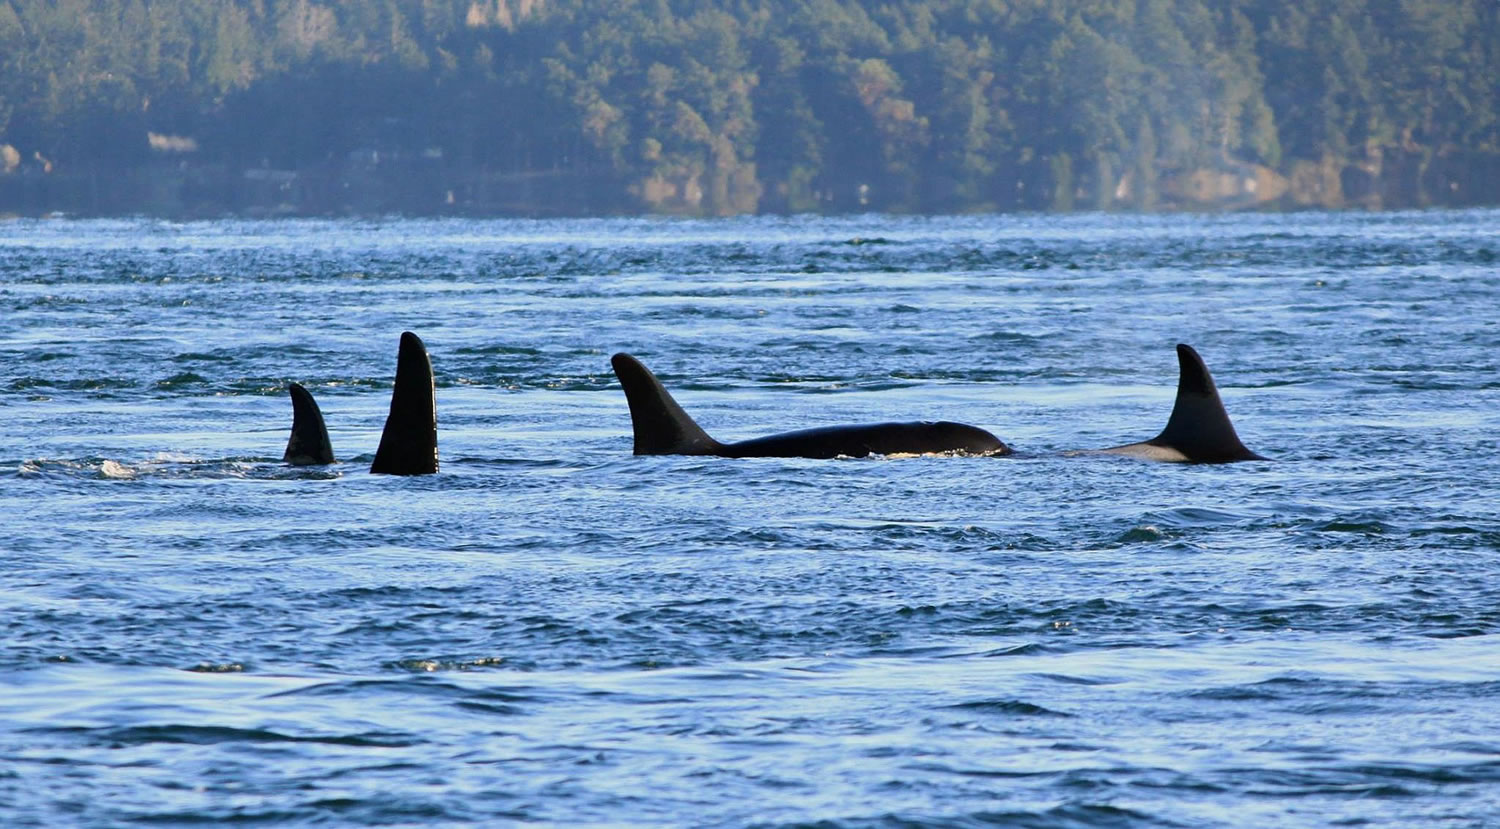 In this photo taken on Nov. 29, 2014, provided by San Juan Orcas, Puget Sound orcas known as the J-pod swim together in Spieden Channel, north of San Juan Island.